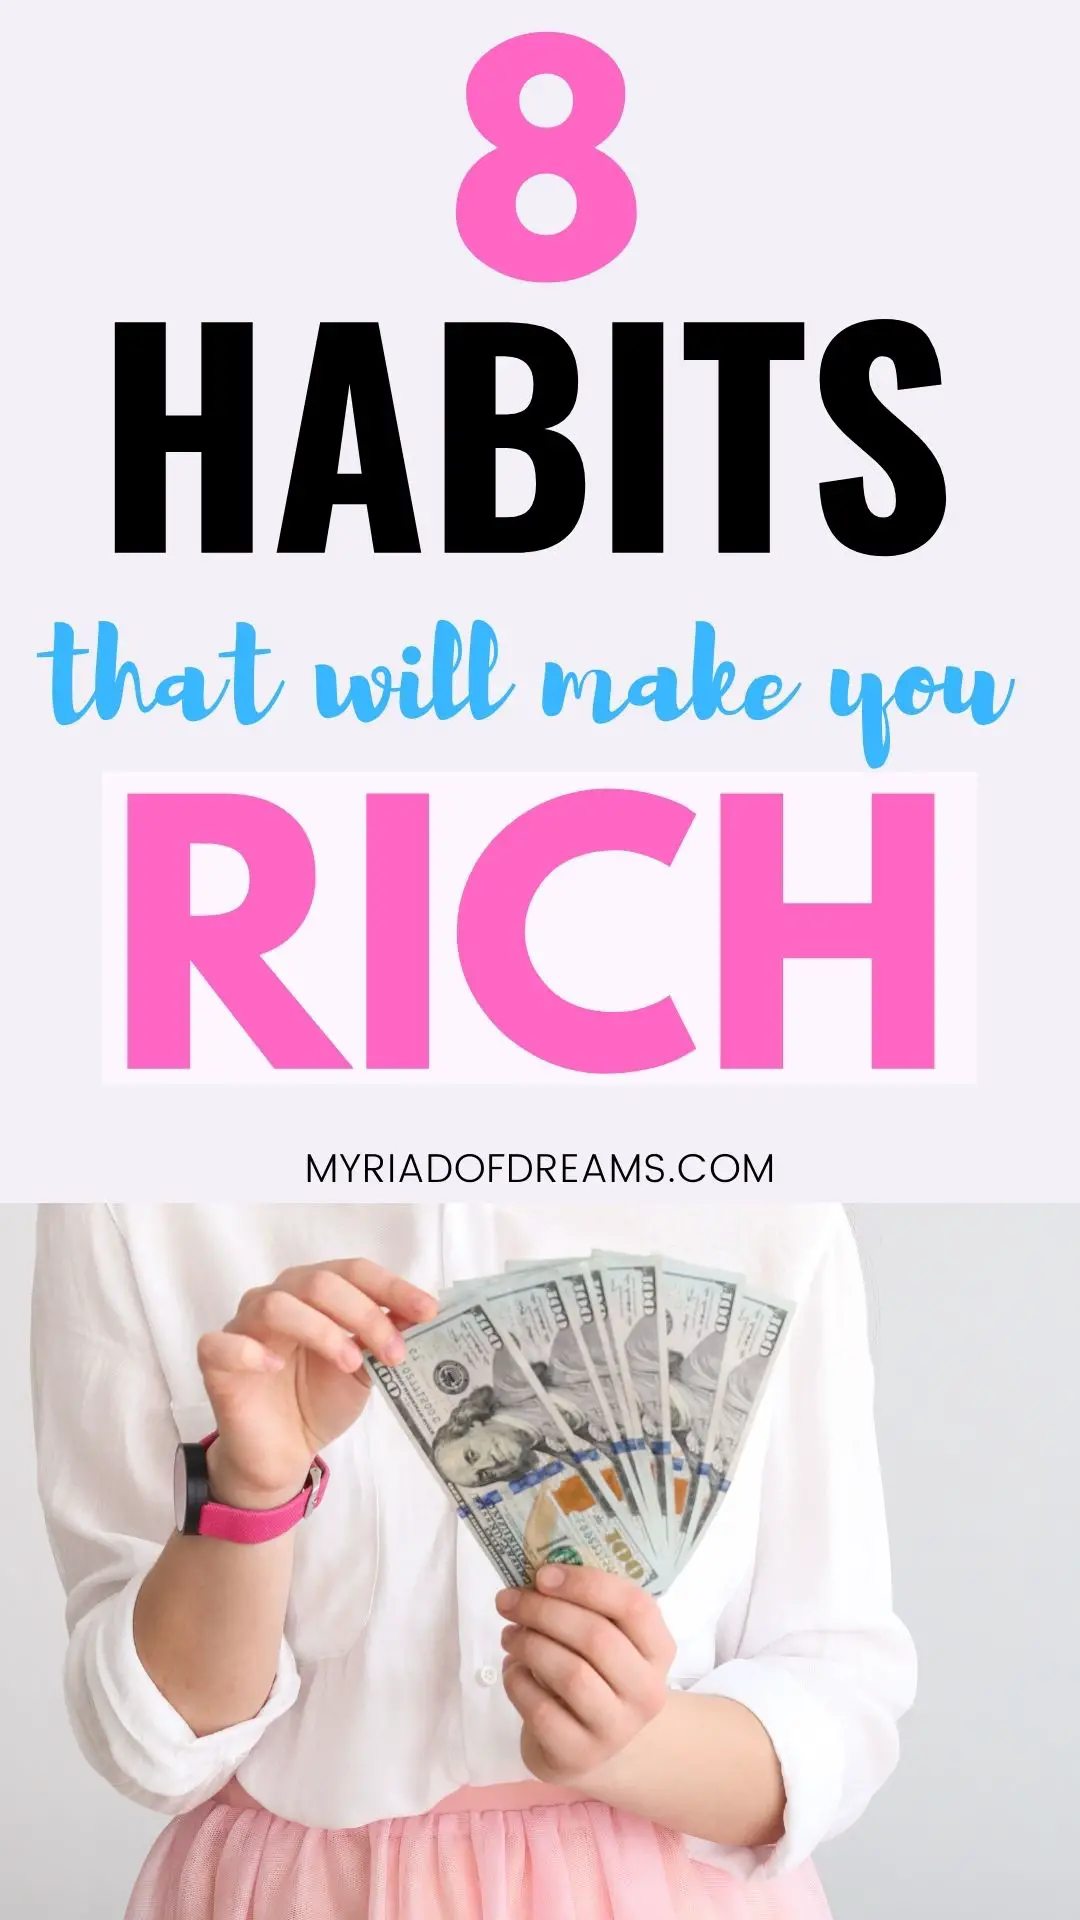 Tired of being broke and want to know the secret habits of people who always have money? Here are 8 financial habits of rich people that help them create wealth. Personal finance tips you wish you knew sooner. Habits of successful women. Rich mindset, money mindset, money saving tips, how to save money and how to get rich. Get out of debt and save for retirement, budgeting ideas, stop being poor and save money. Frugal lifestyle, grow your savings, frugal living, achieve financial freedom.